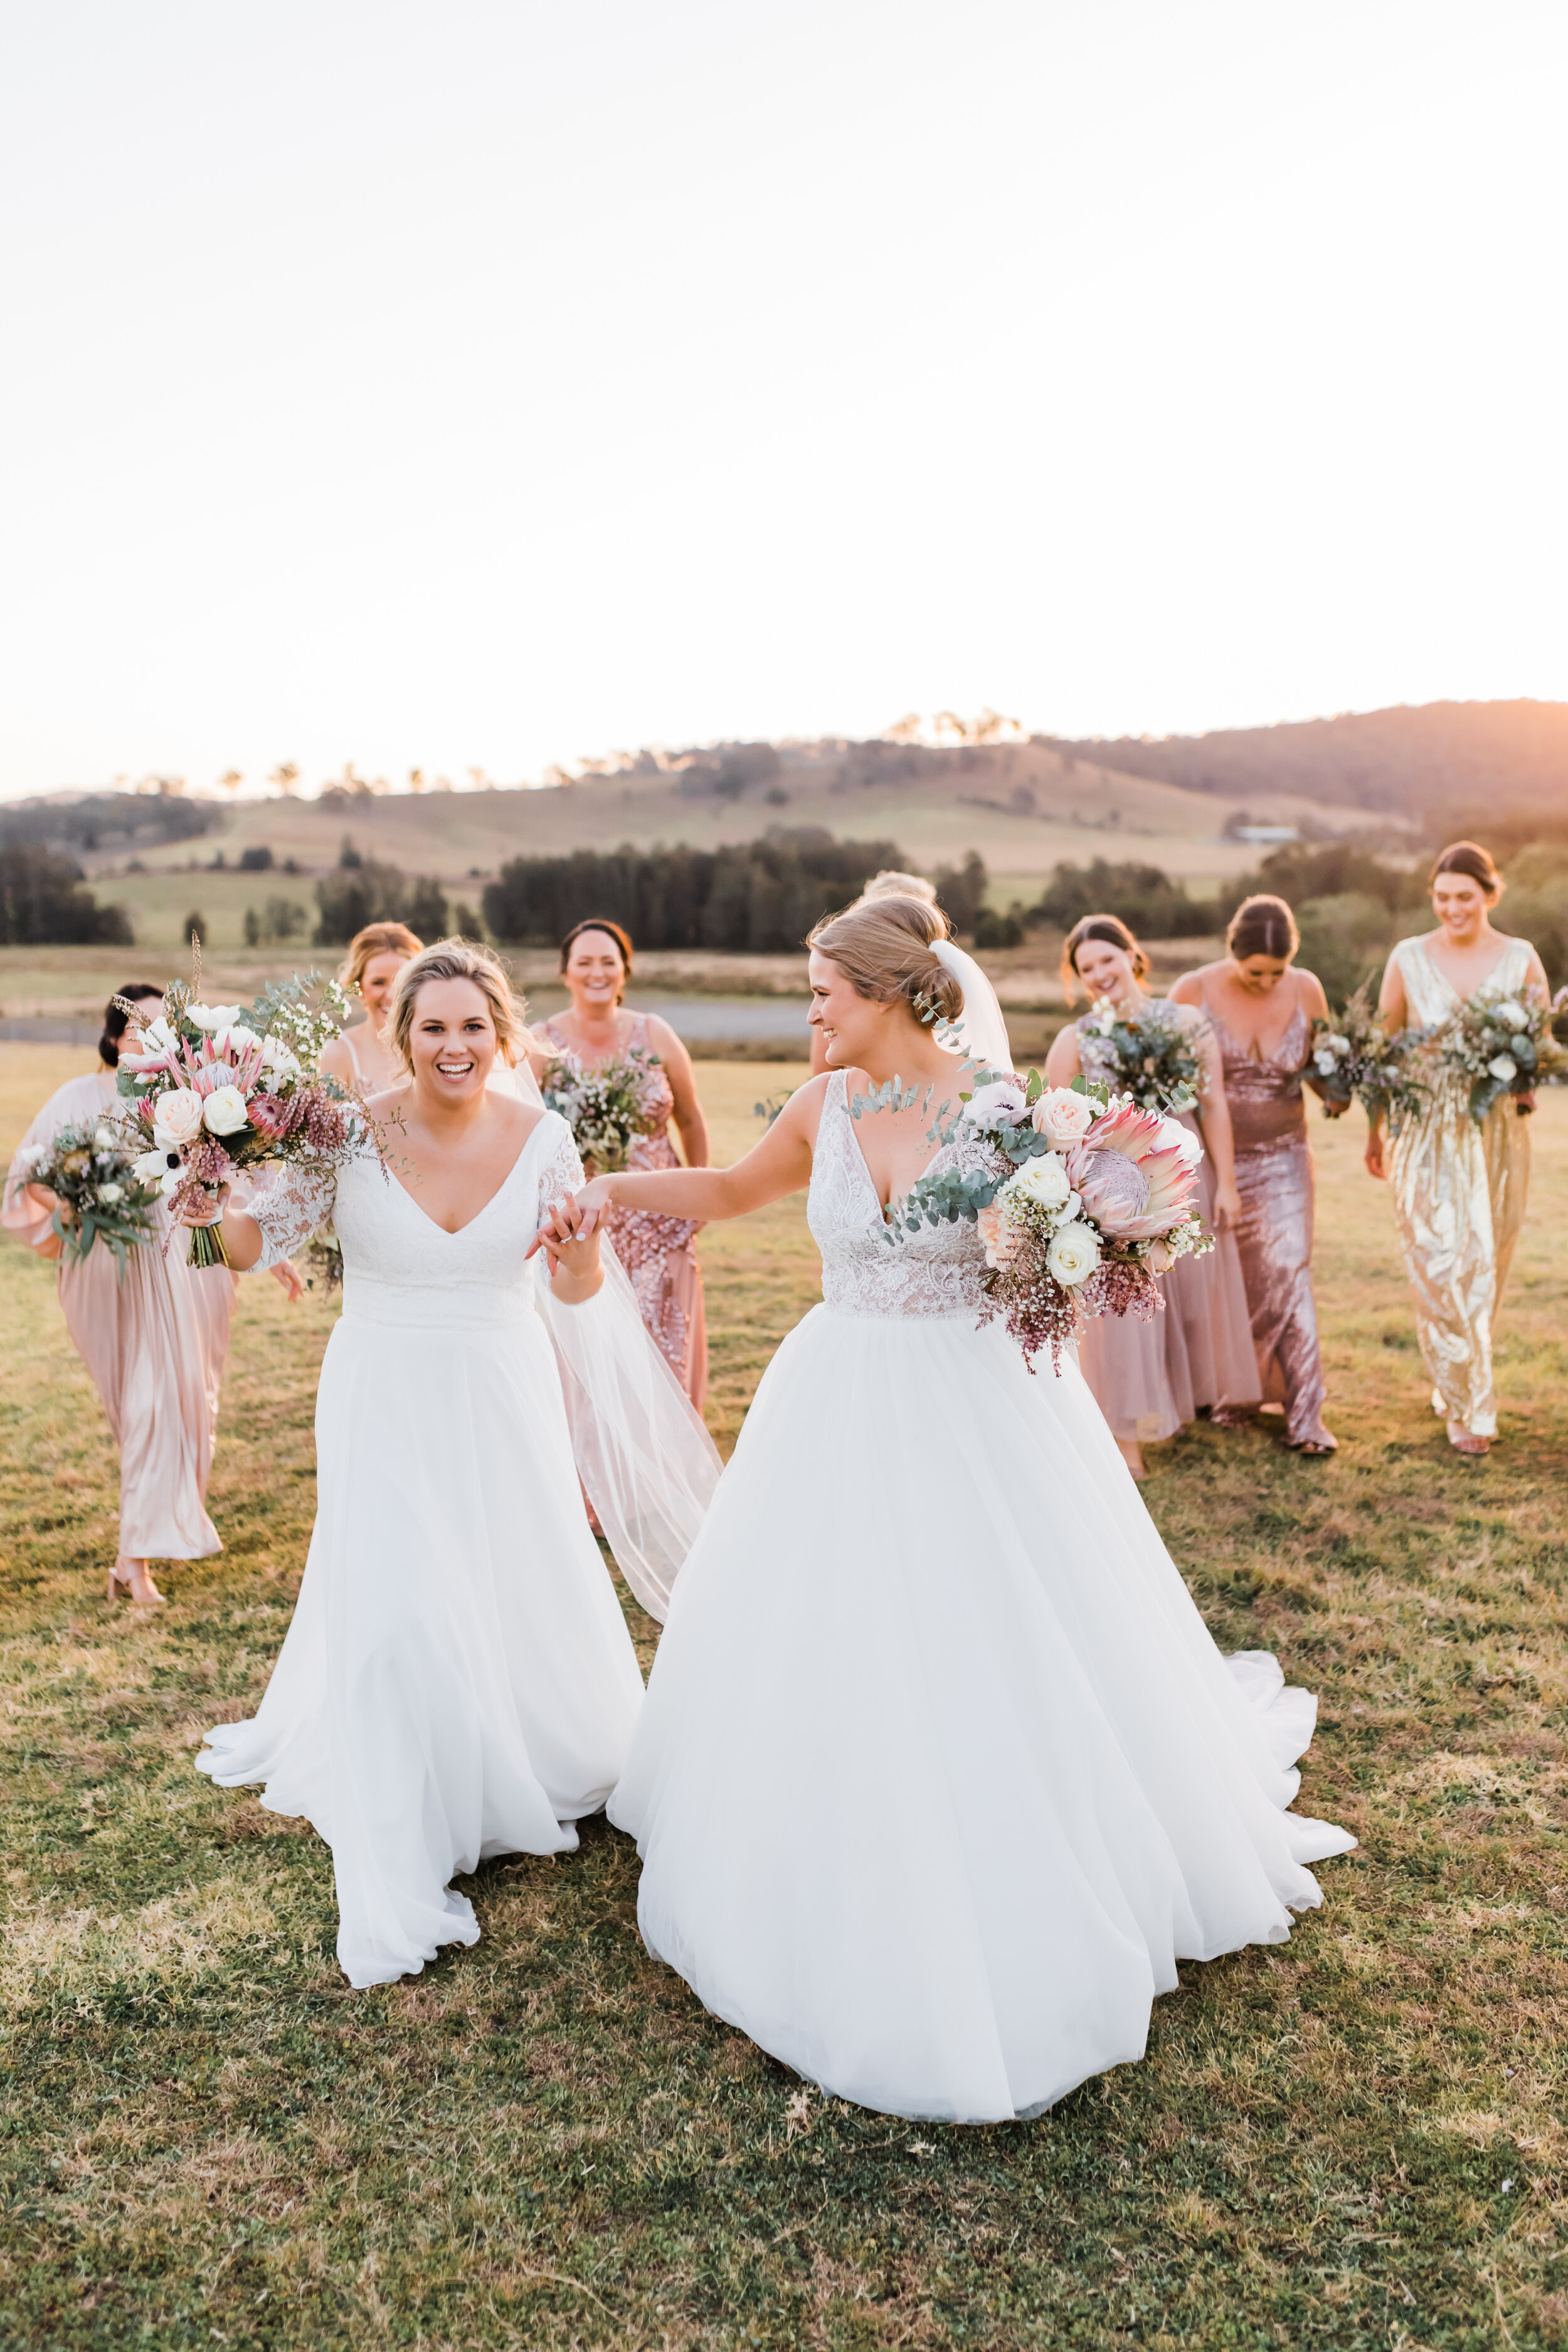 Newcastle & Hunter Valley Wedding Photographer | Stories With Mel